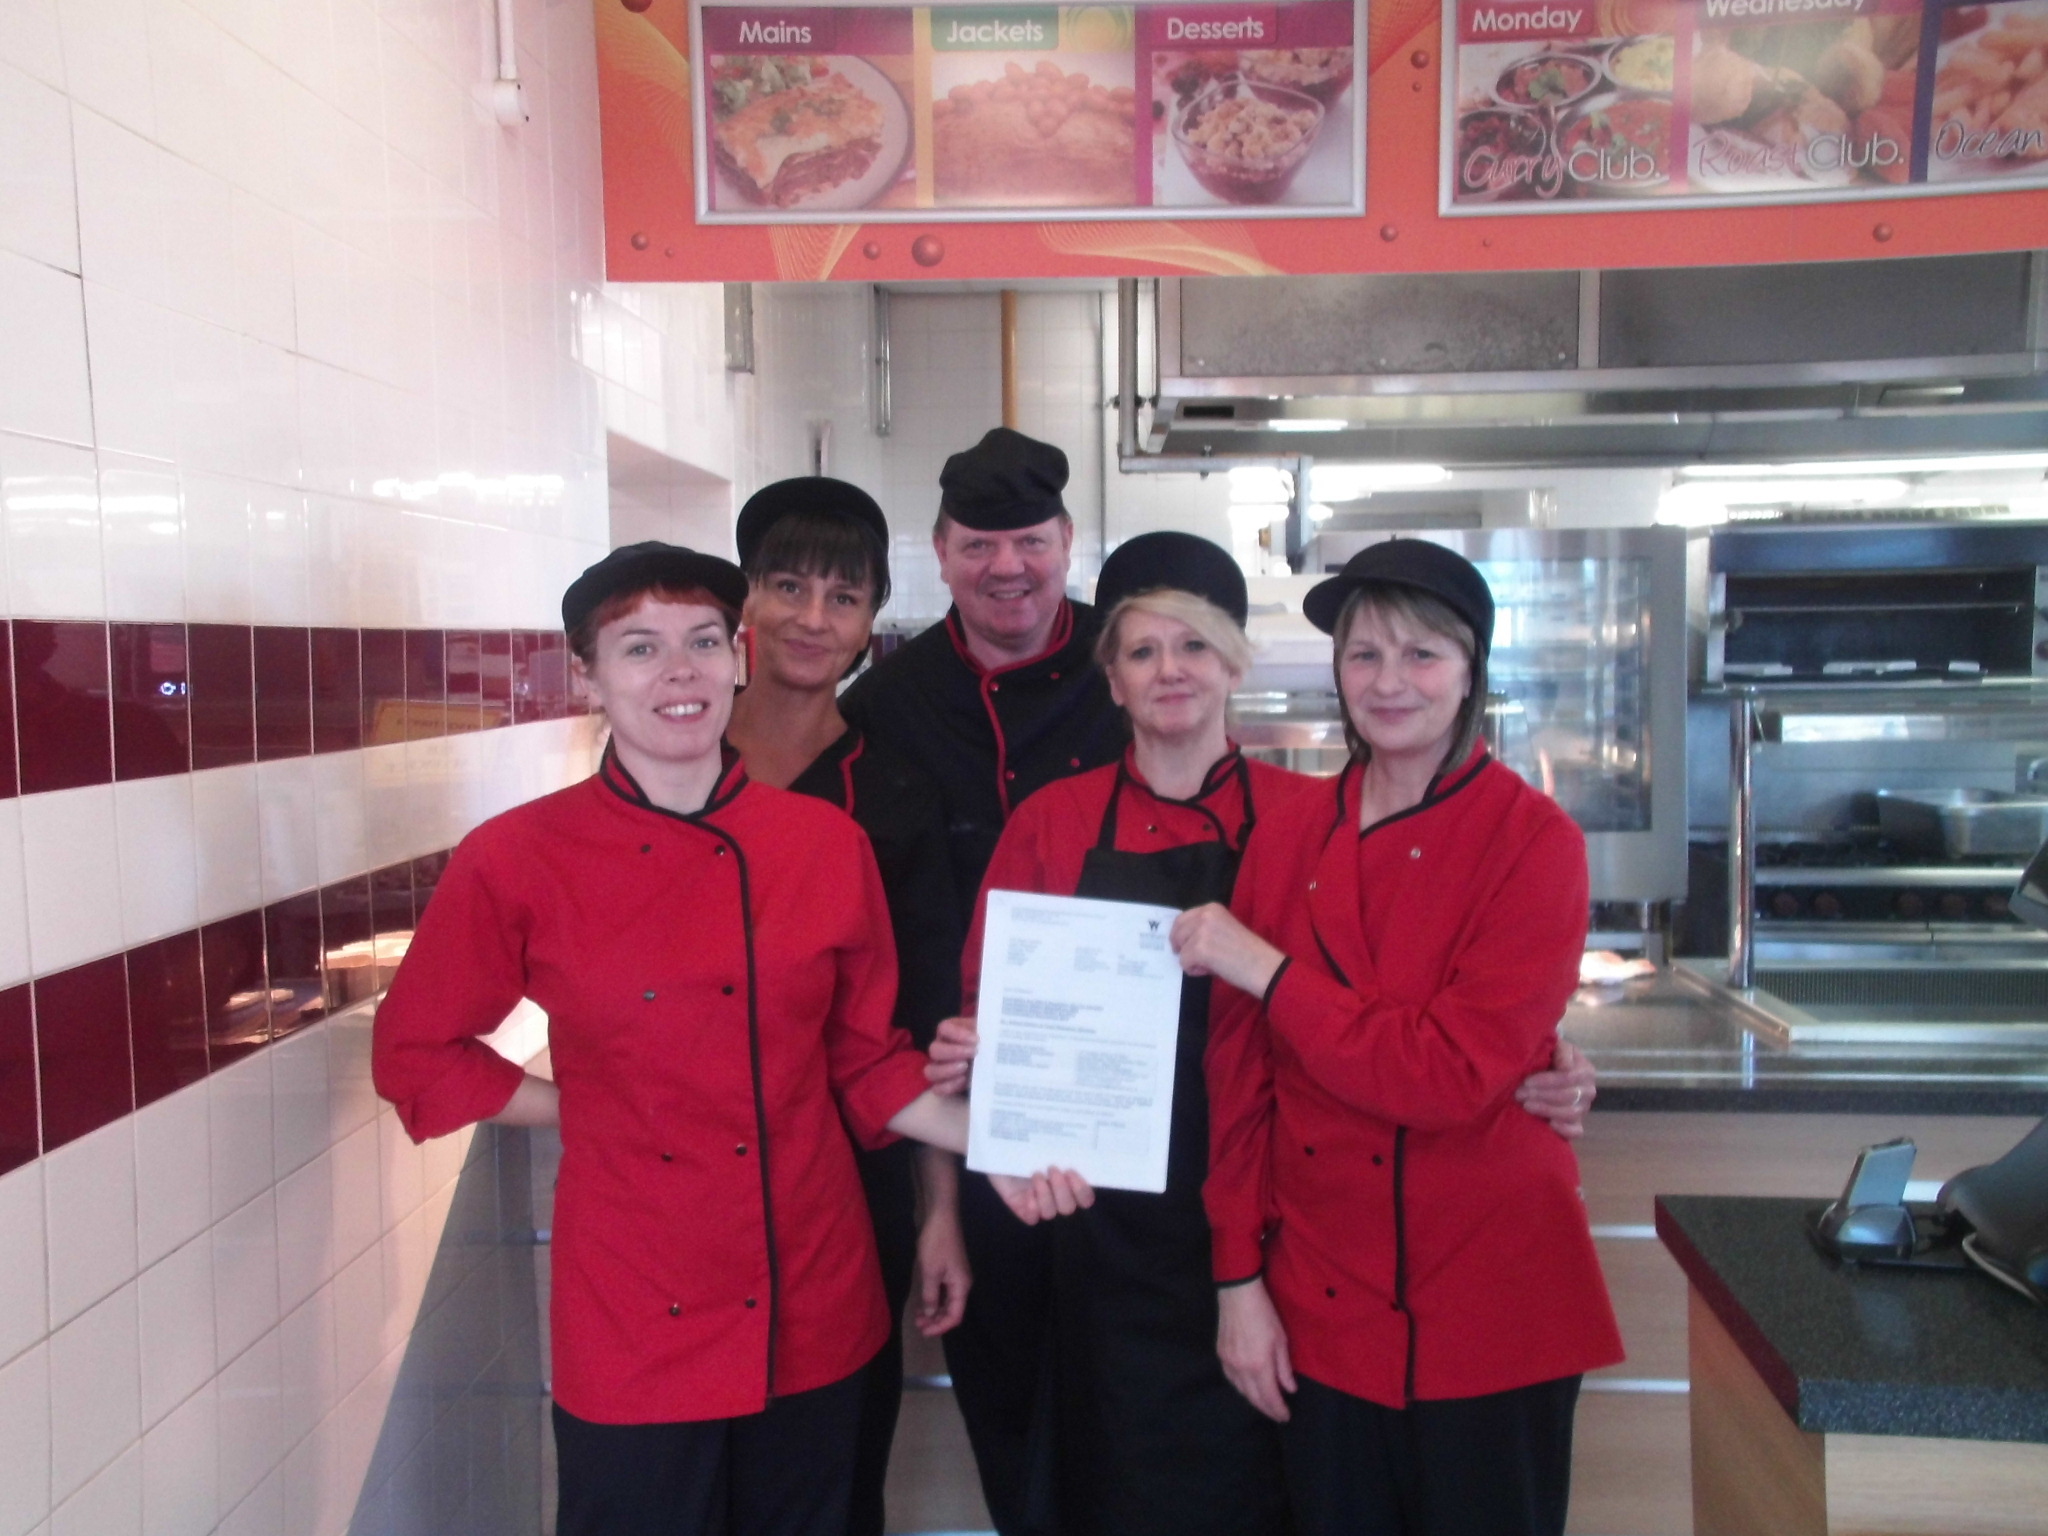 Ysgol Rhiwabon head cook Mark Davies and his team with the official letter and certificates for their top hygiene rating.